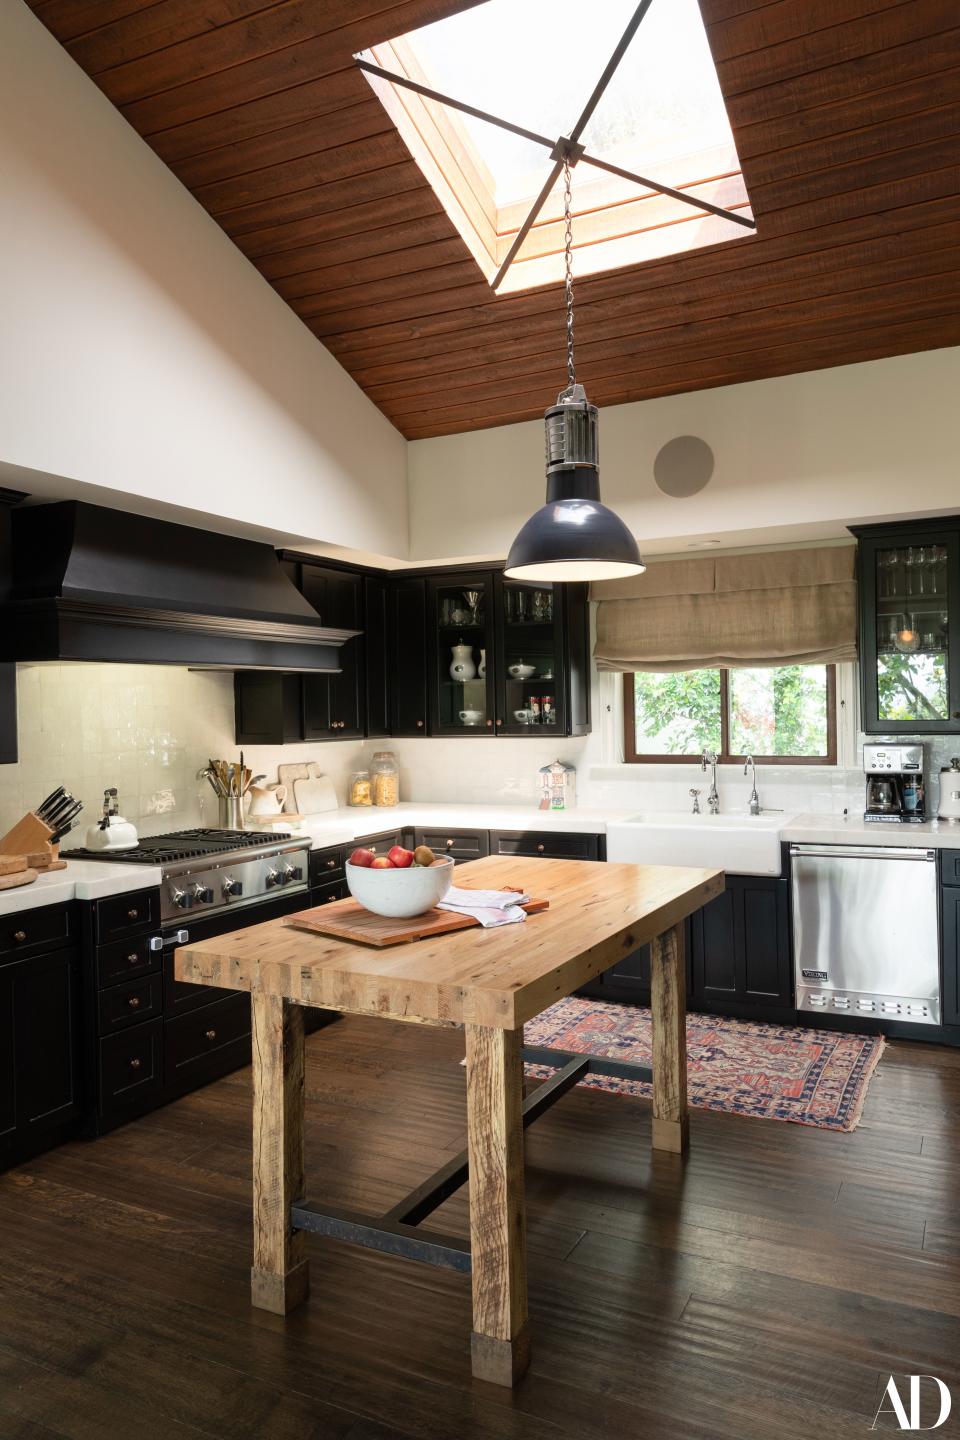 In the Beverly Hills house John Stamos shares with his wife, Caitlin, and son, Billy, the kitchen is modern but rustic thanks to the furnishings, which include black cabinets and a reclaimed-wood table for preparation. Stamos shares: “We cook in the kitchen and outside, where I have a pizza oven. That was Caitlin's and my first date: She said she liked pizza!”